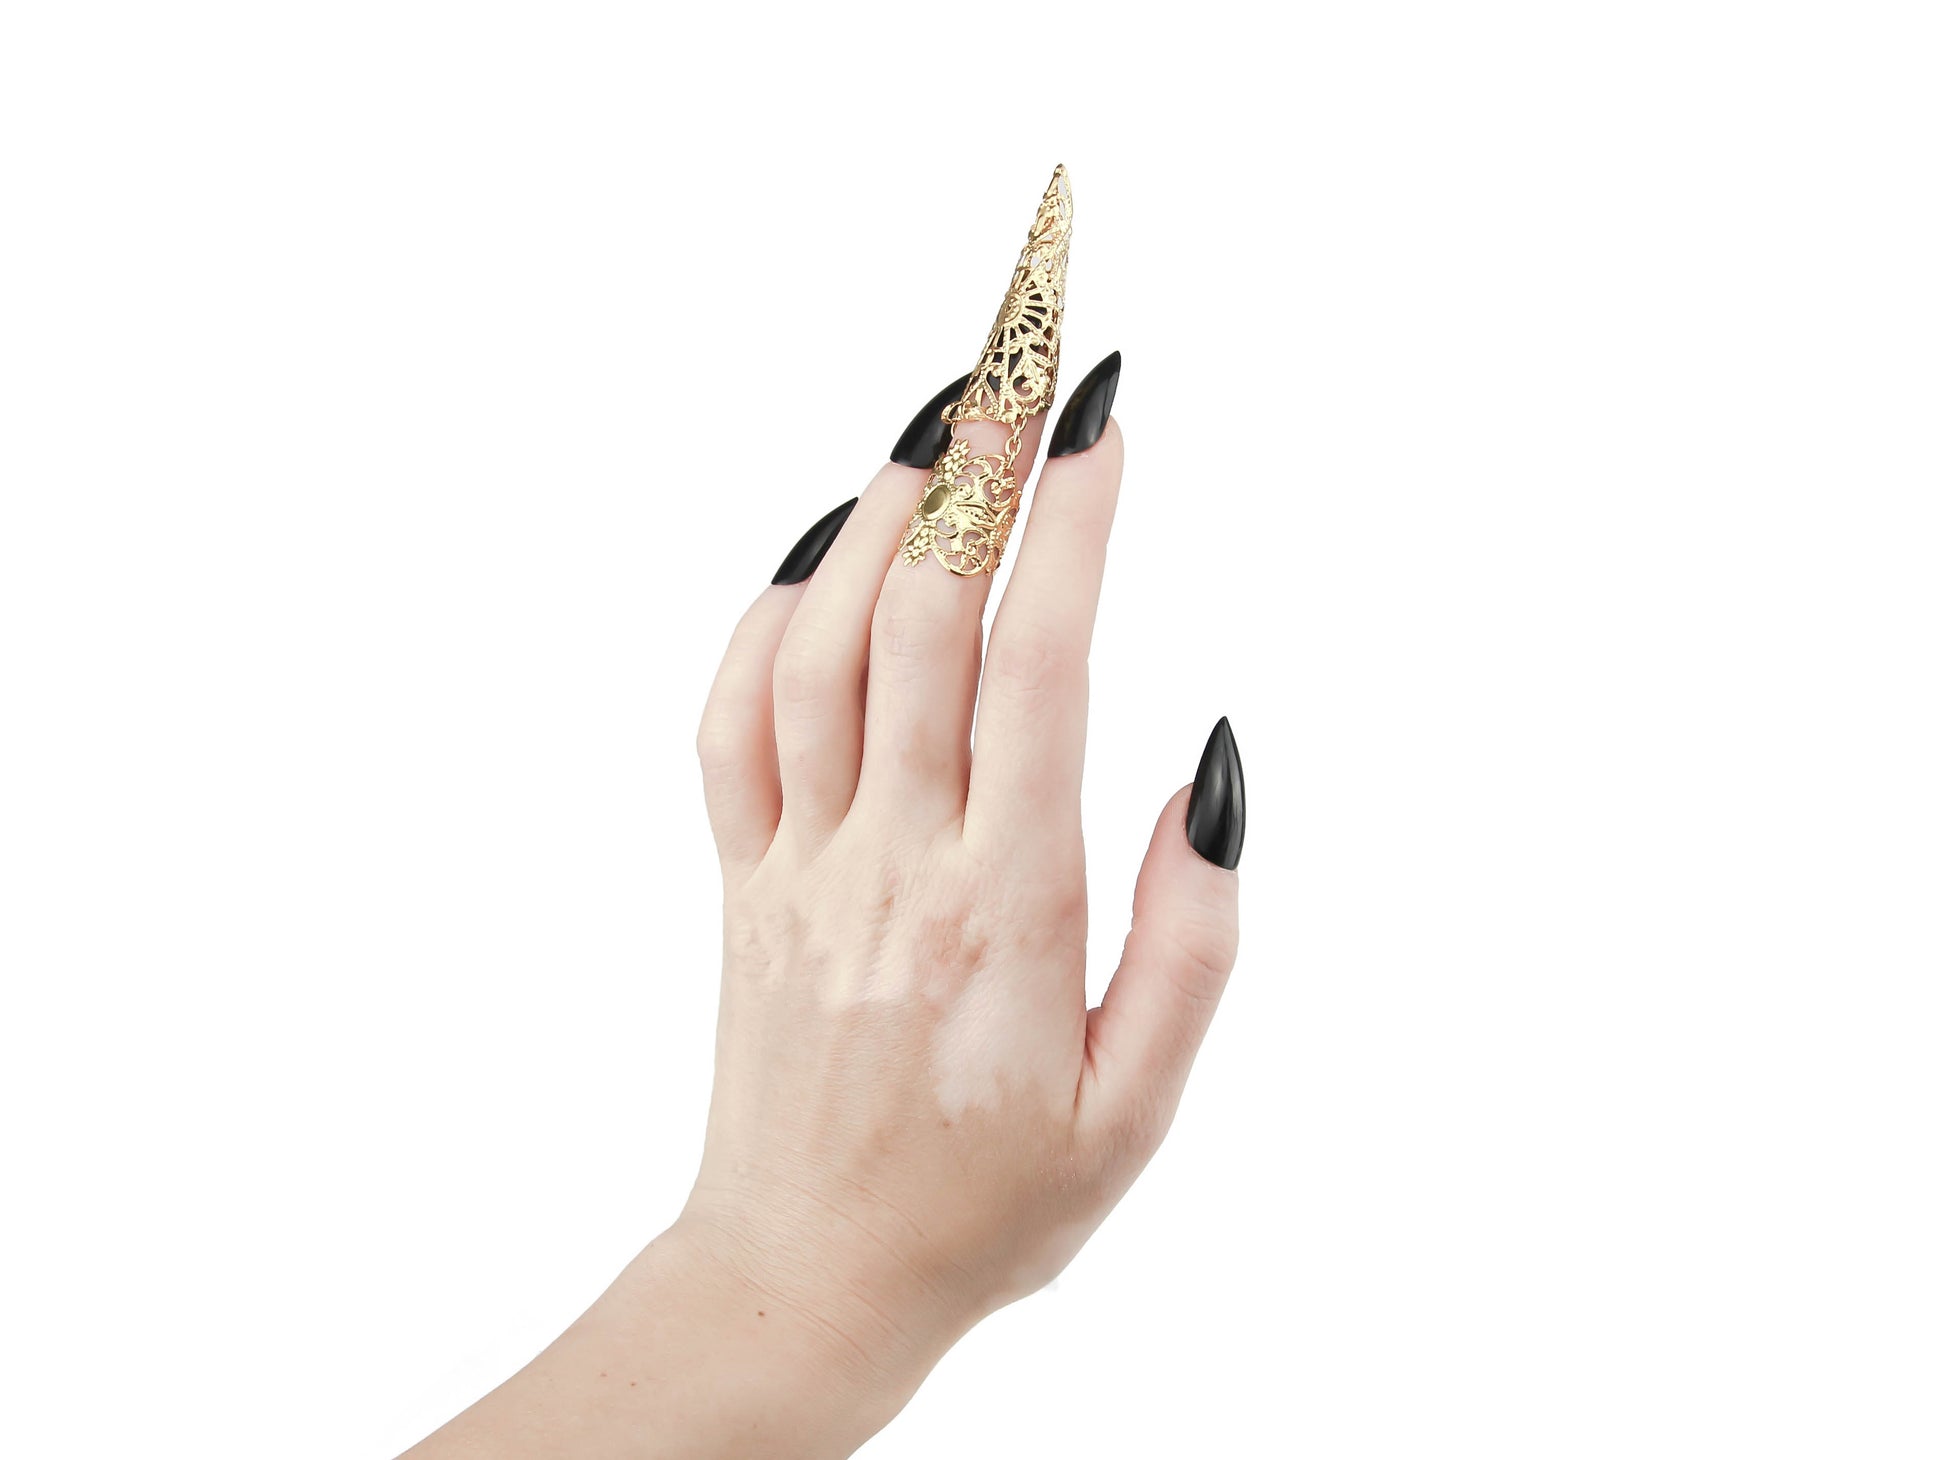 This image captures a hand adorned with a Myril Jewels gold claw ring on the middle finger, its design reminiscent of Neo Gothic artistry. The midi ring, characteristic of dark-avantgarde jewelry, extends into a pointed tip that mirrors the wearer's sleek black nails, creating a seamless gothic-chic look. This statement piece is perfect for those embracing a minimal goth style or seeking an edgy accessory for Halloween, witchcore, or whimsigoth fashion statements.